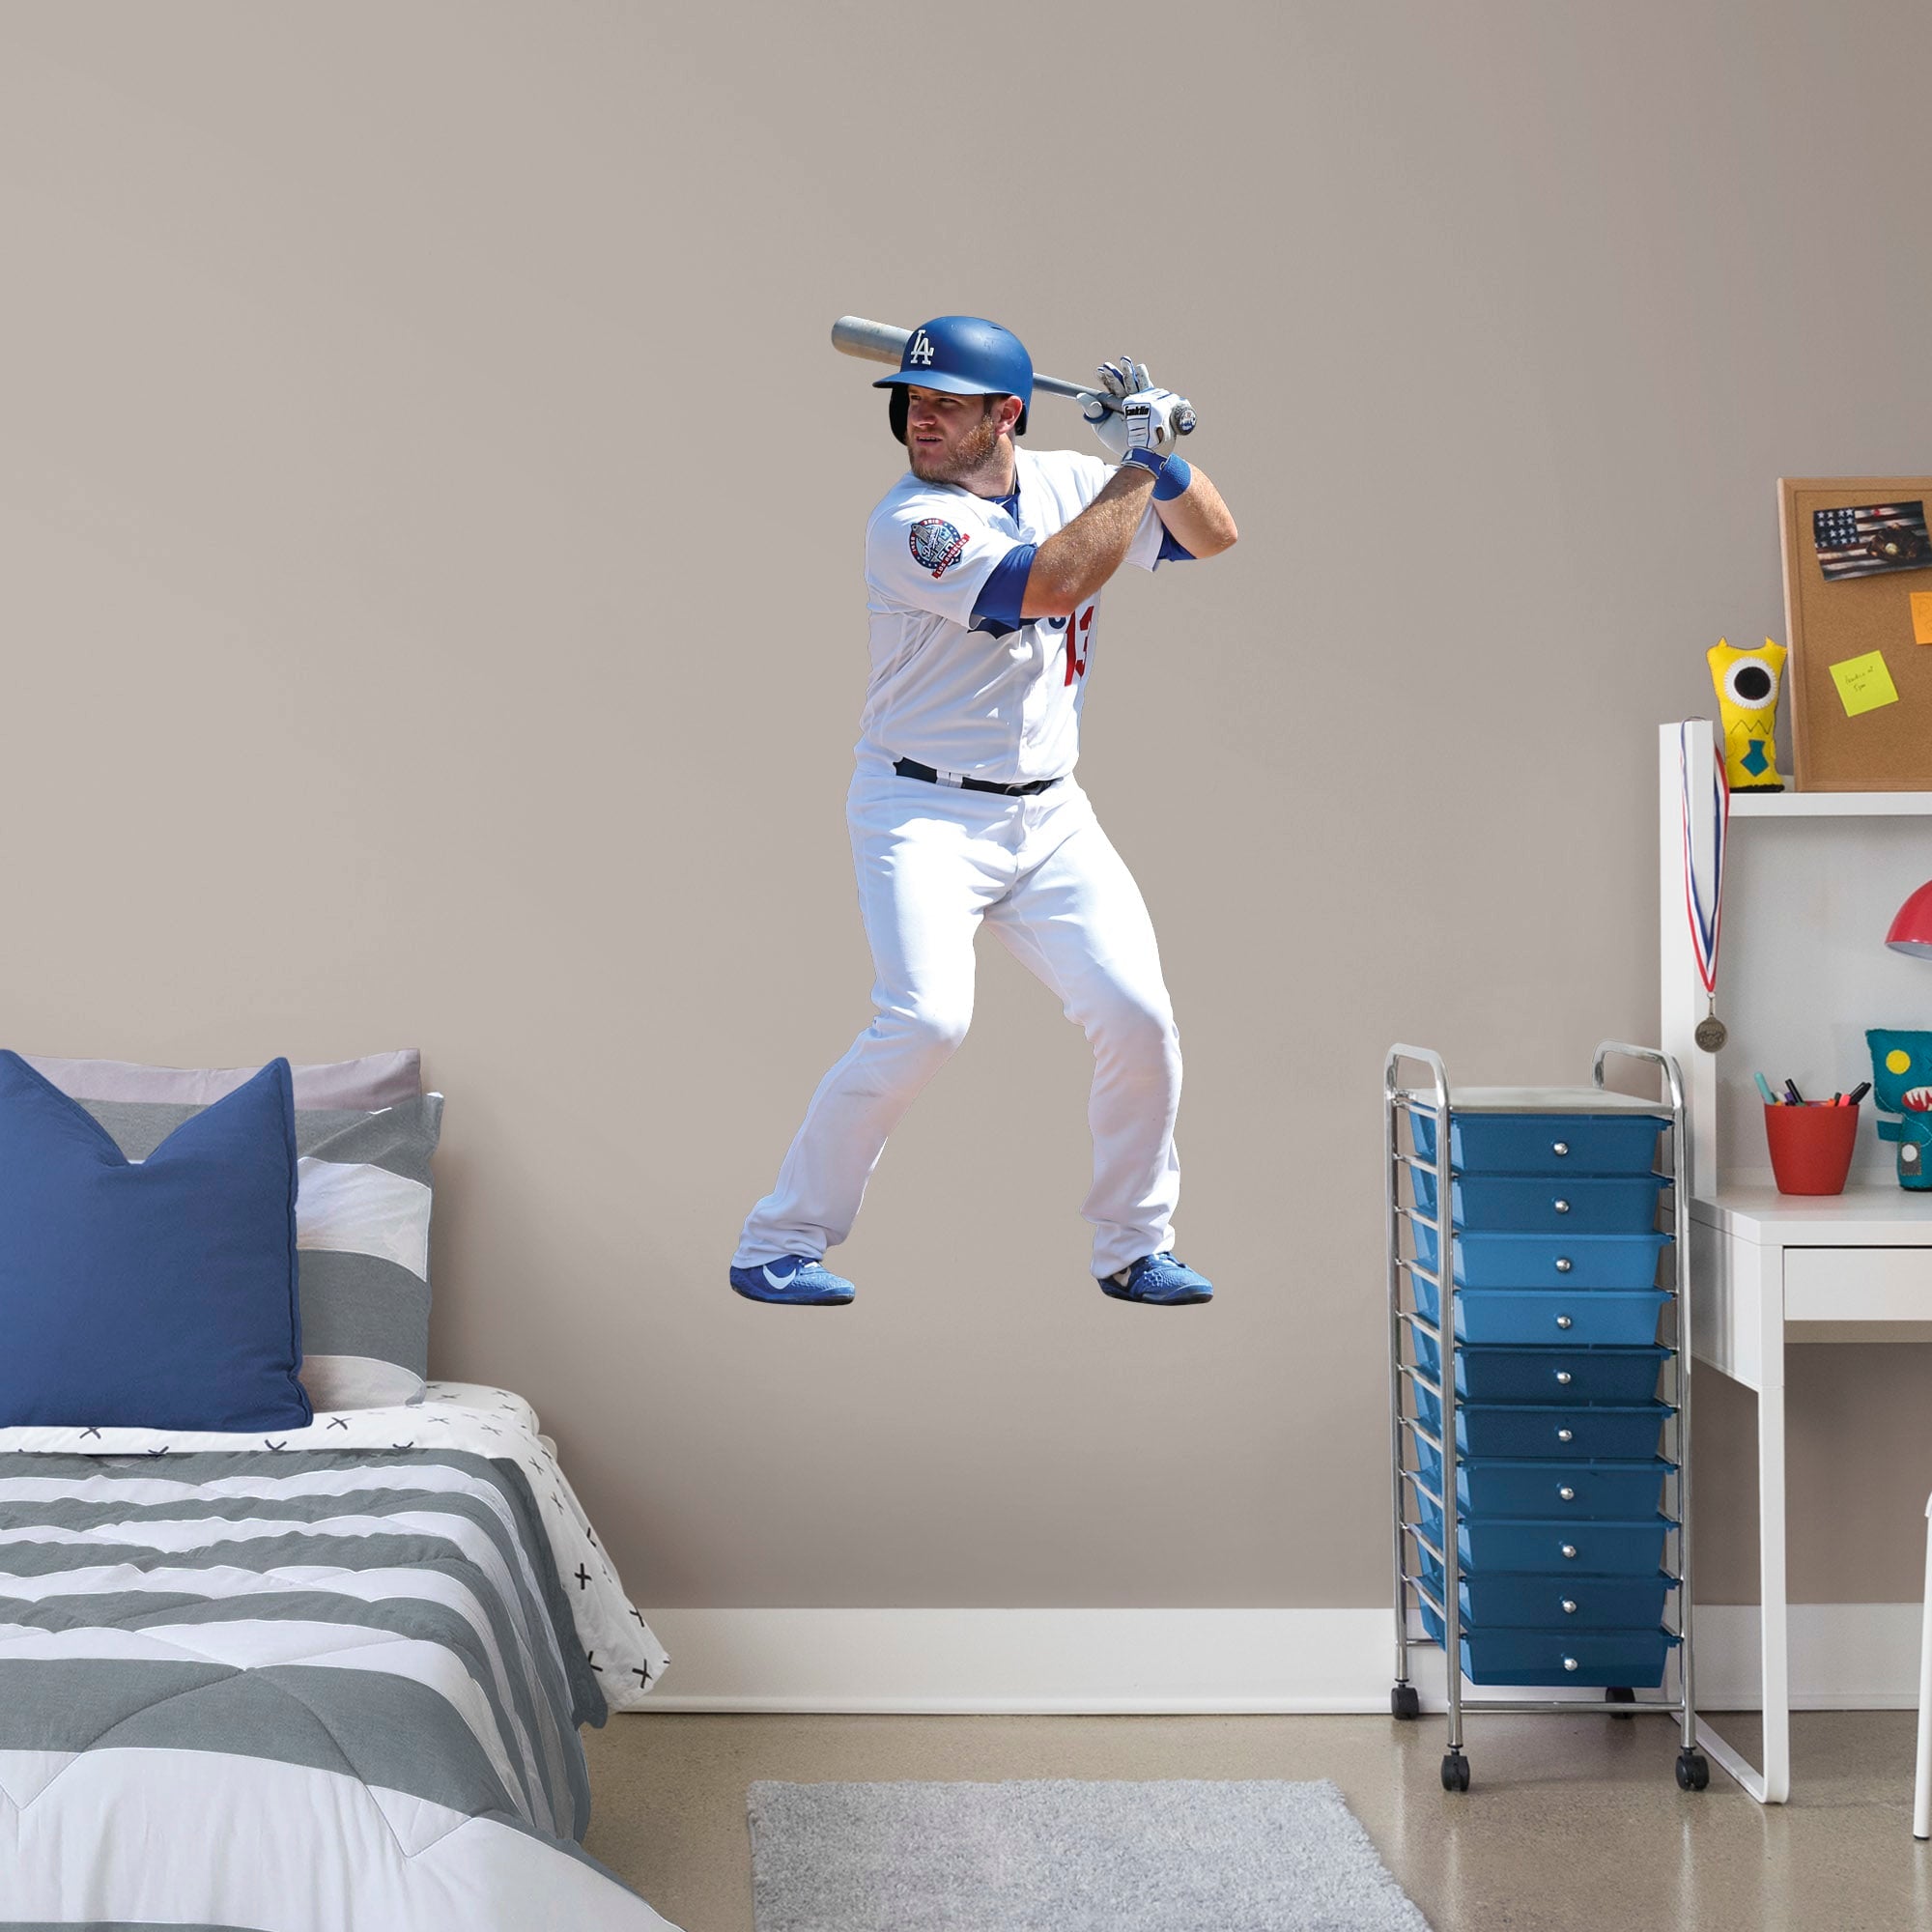 Max Muncy for Los Angeles Dodgers - Officially Licensed MLB Removable Wall Decal Giant Athlete + 2 Decals (26"W x 51"H) by Fathe